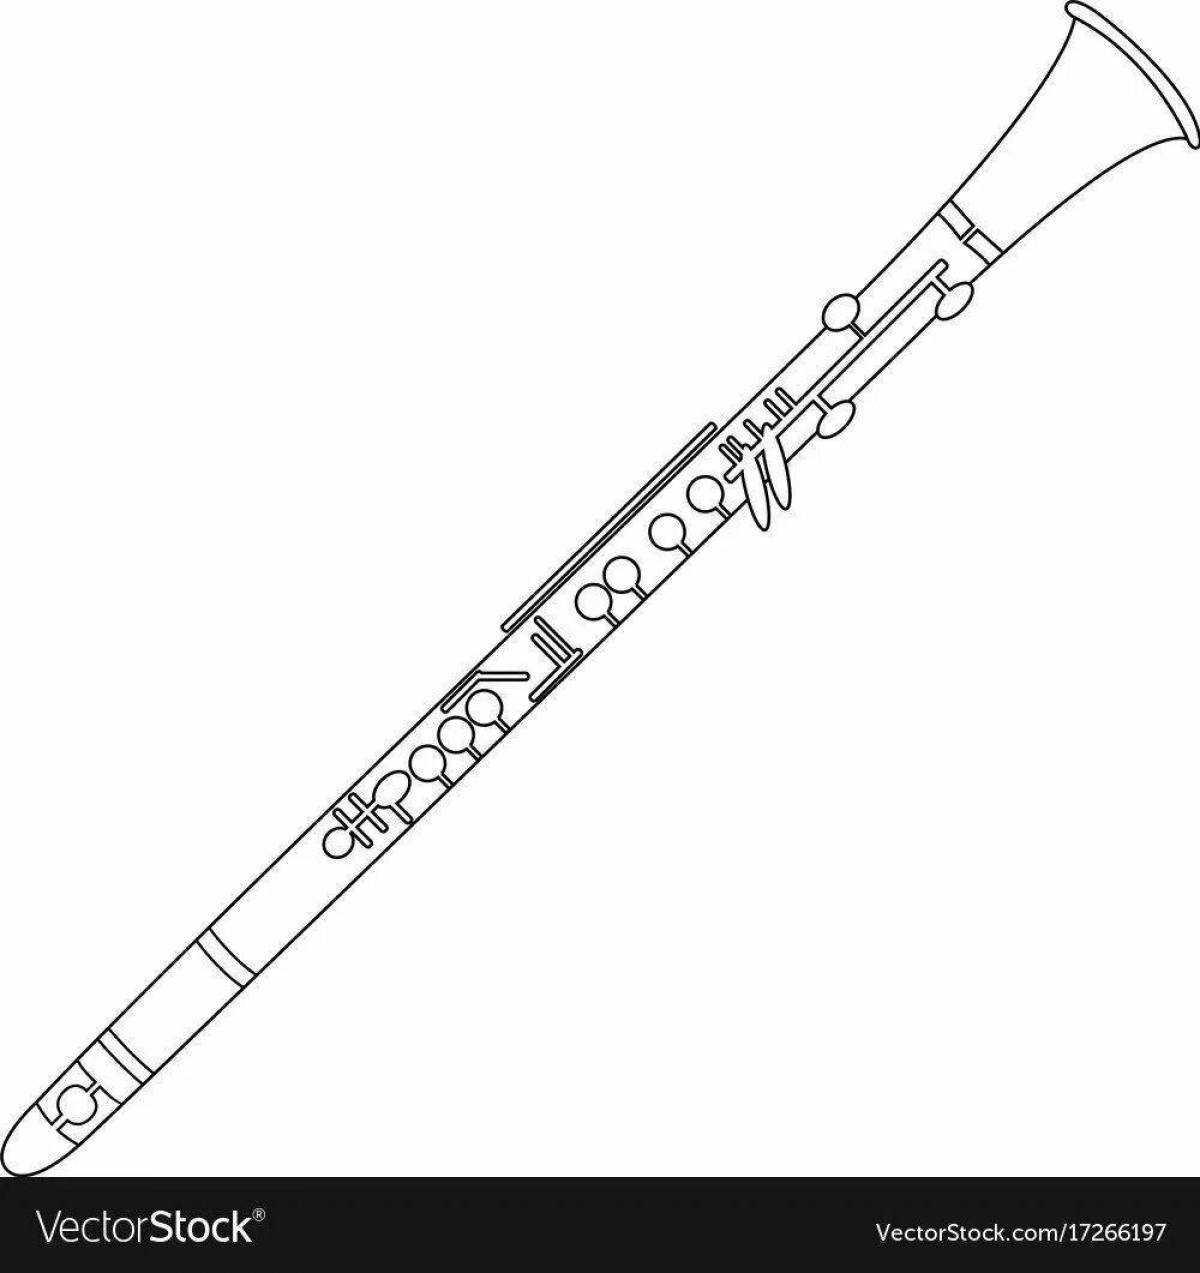 Coloring book large musical instrument flute